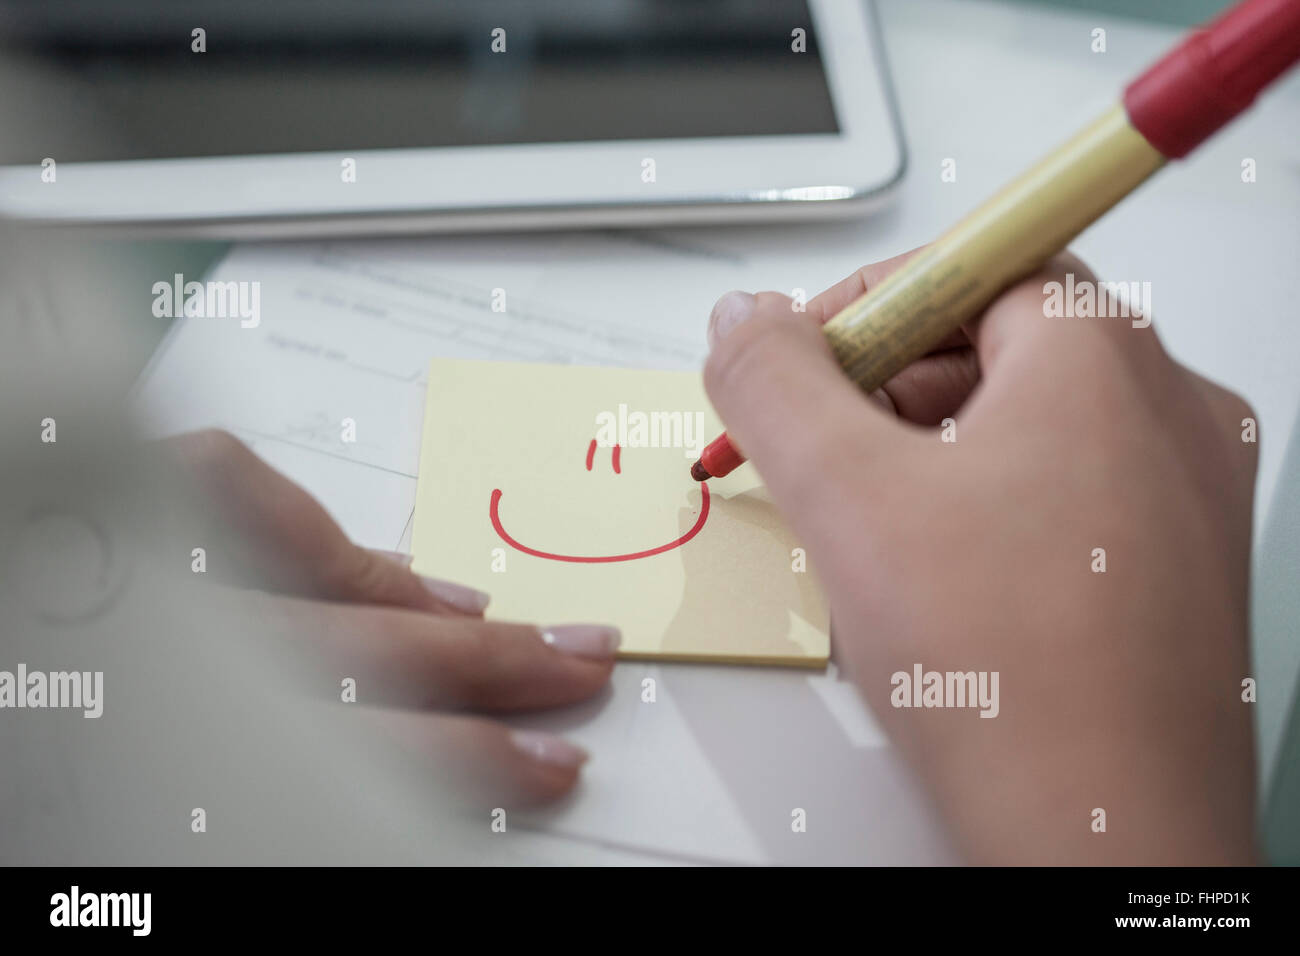 Close-up of woman at desk drawing a smiley face on sticky note Stock Photo